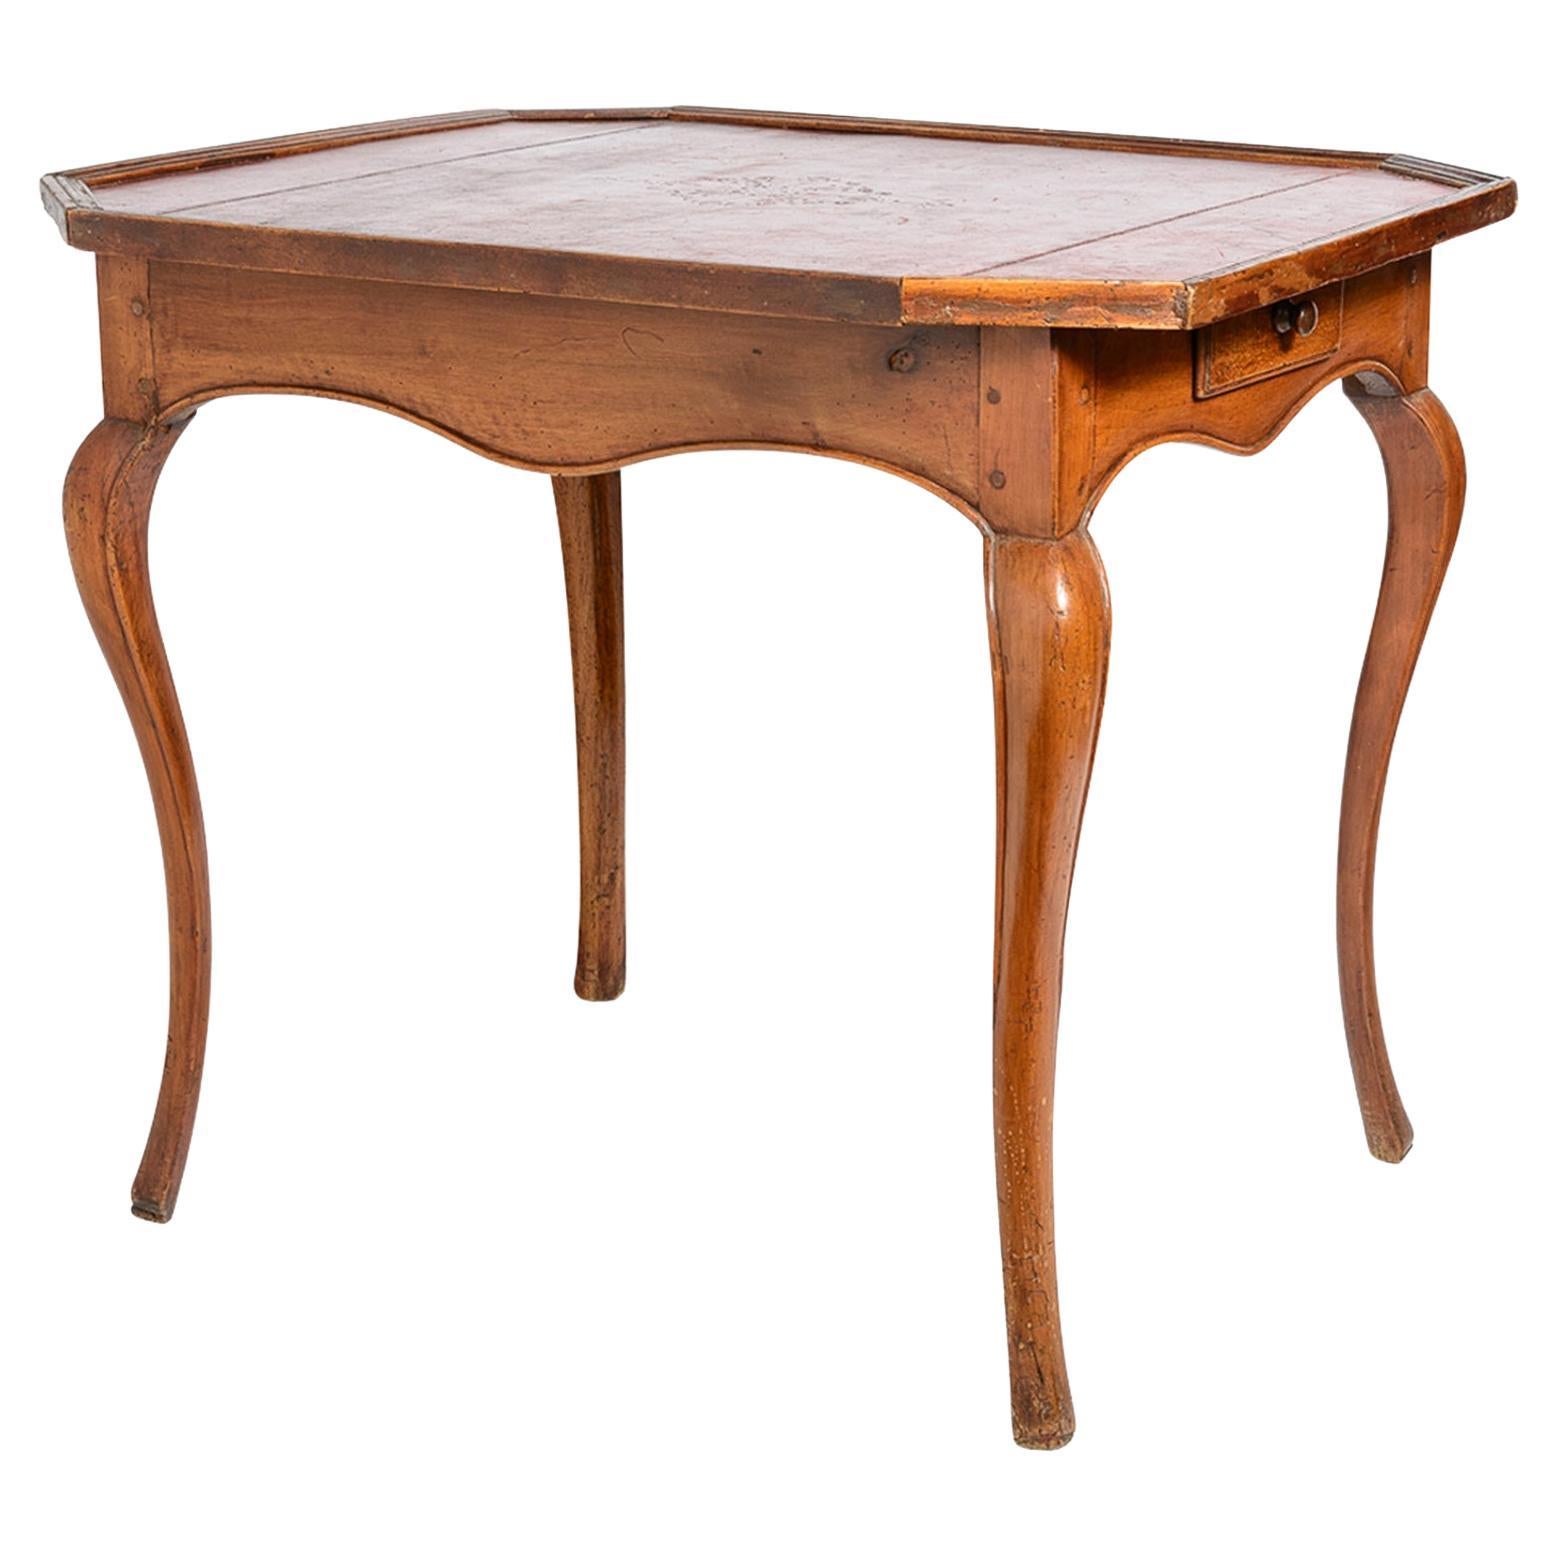 French Louis XV Period Game Table With Original Red Leather Top, 18th C. For Sale